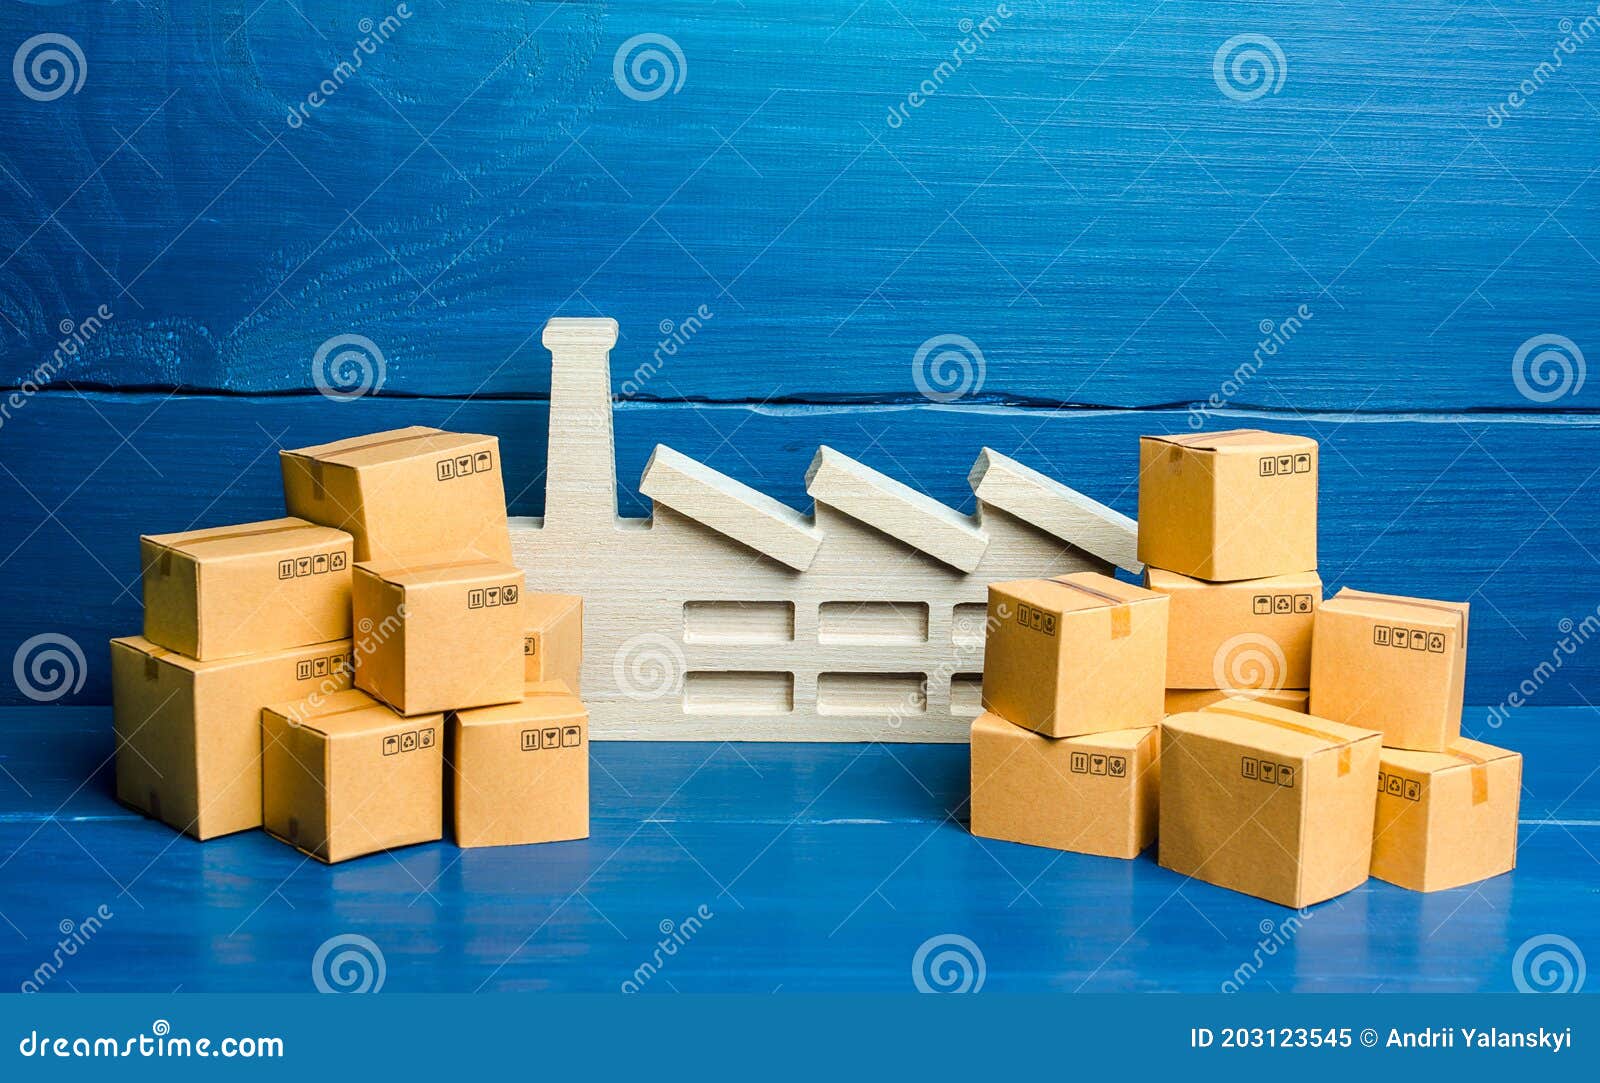 a figurine of a plant and a lot of boxes. the concept of overproduction of goods. overstocking of manufacturer`s warehouses, low